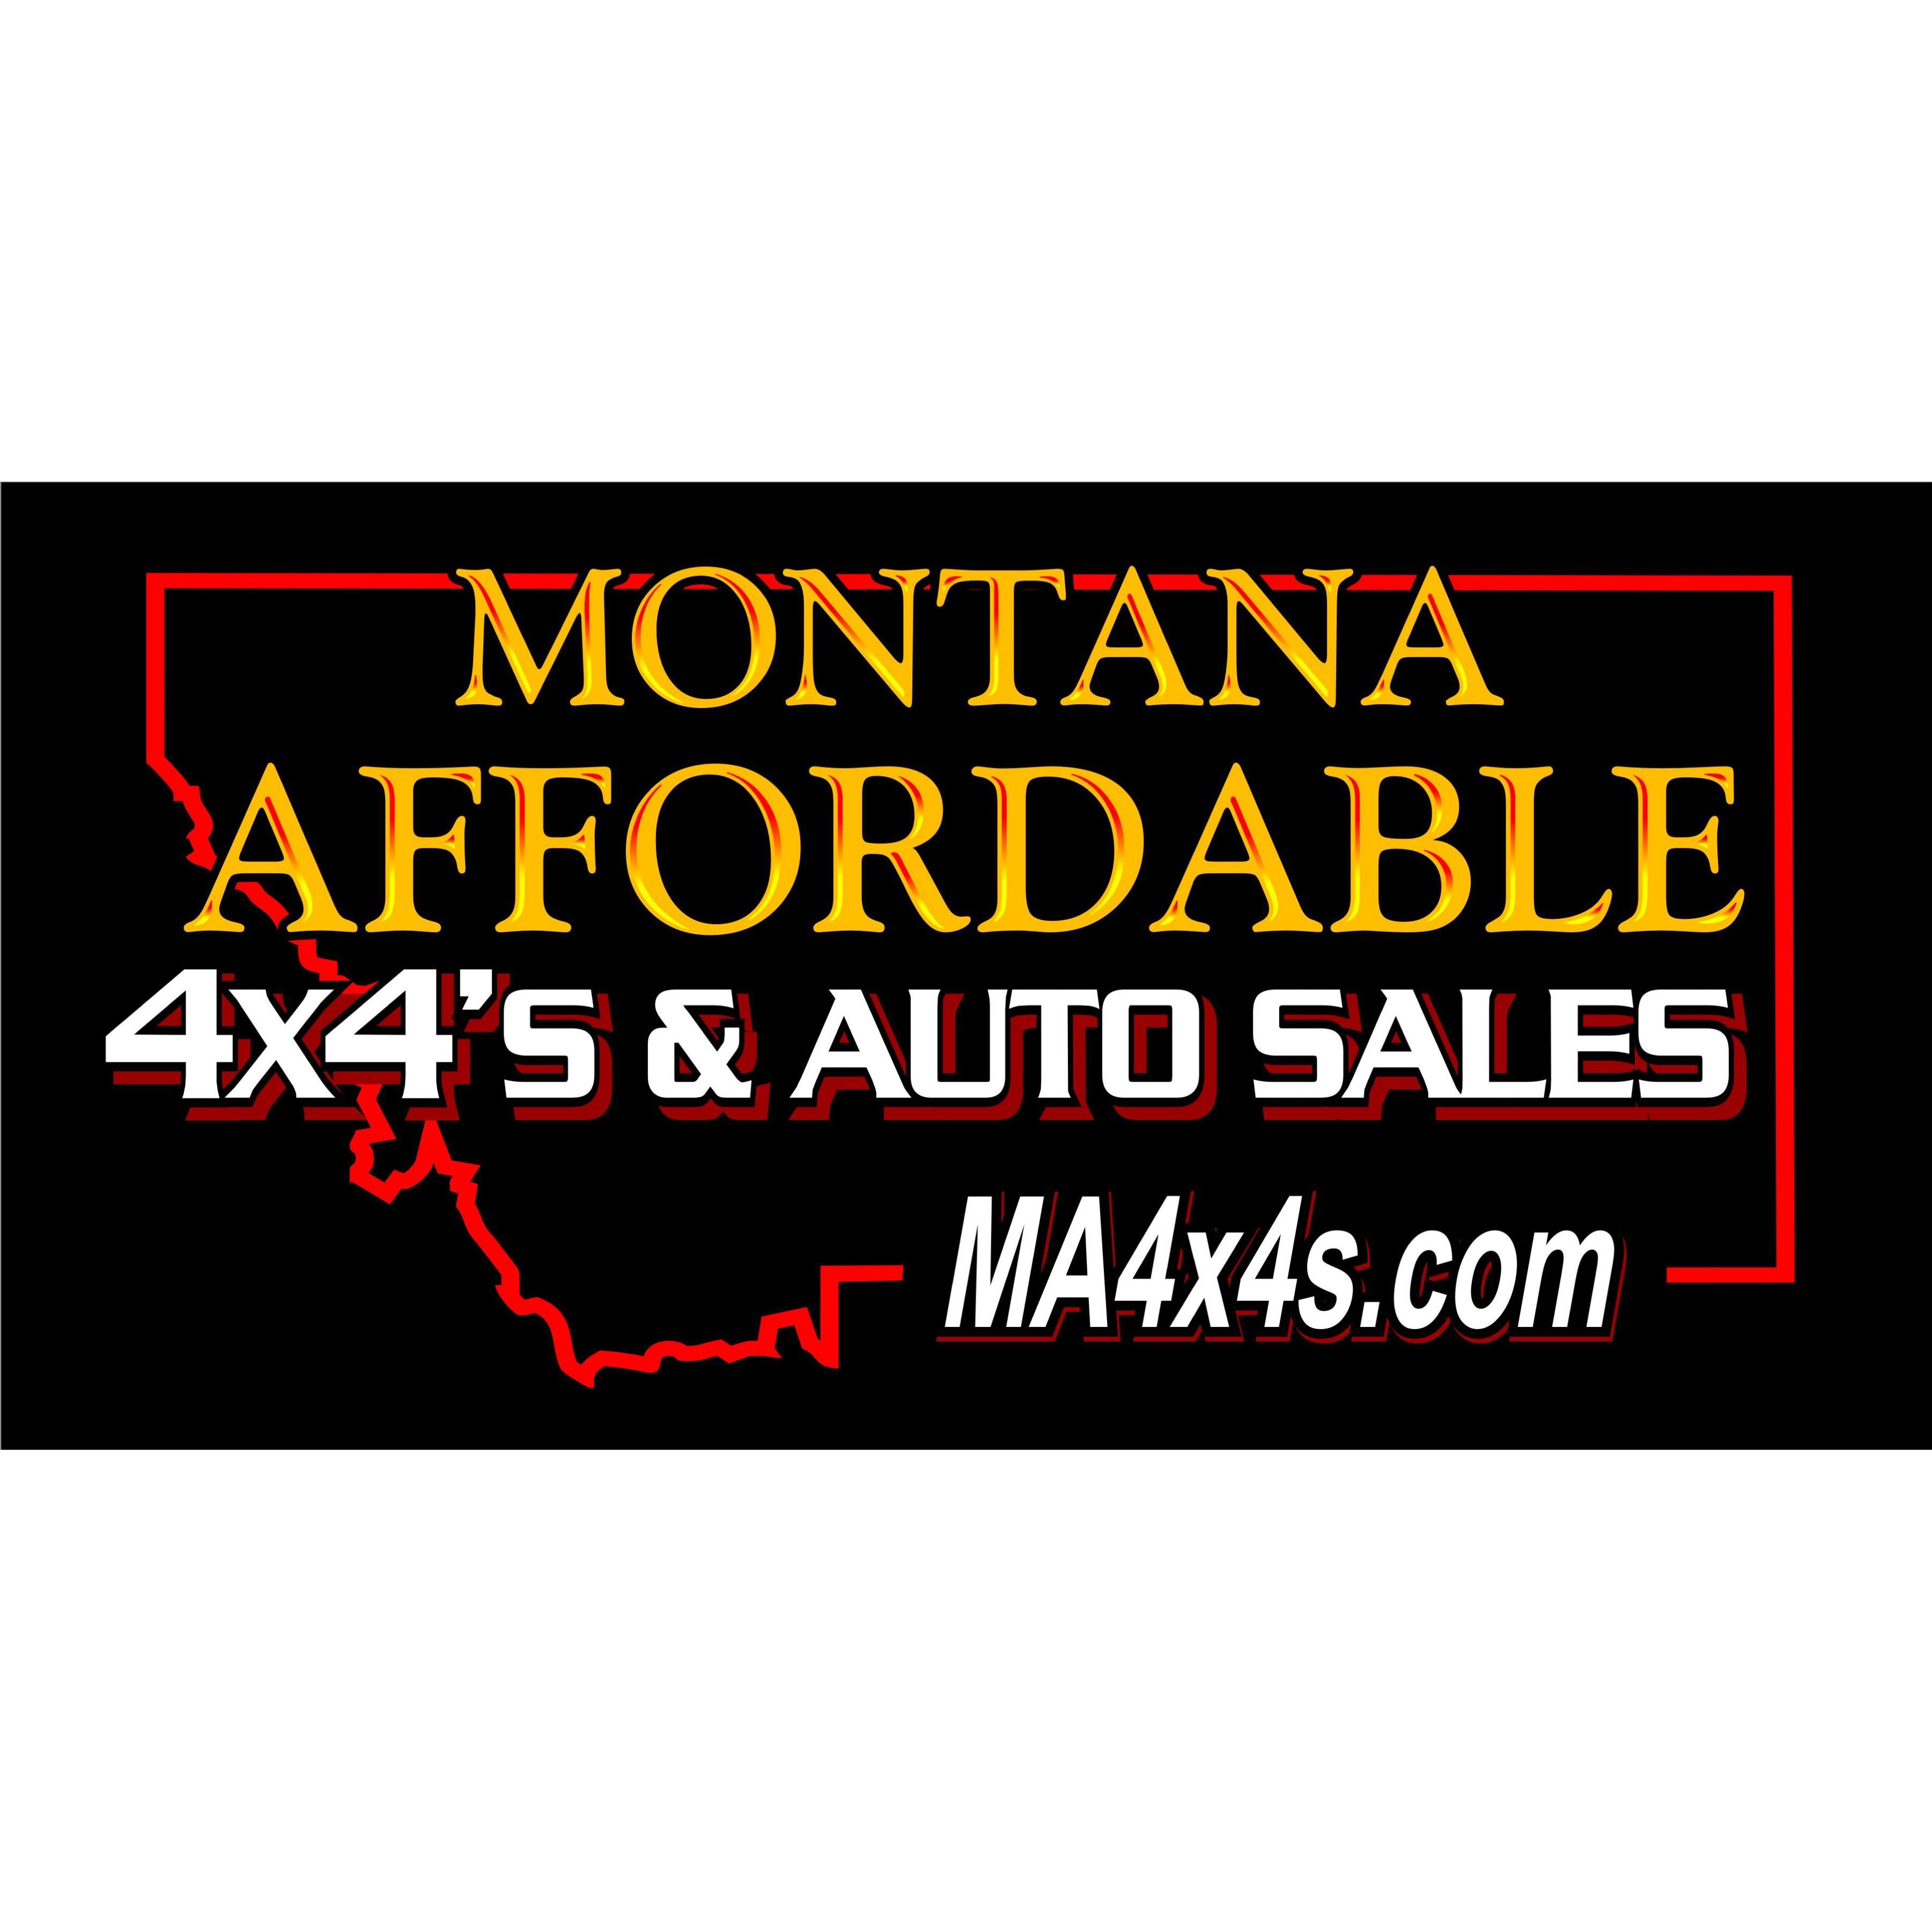 MONTANA AFFORDABLE 4x4's & Auto Sales